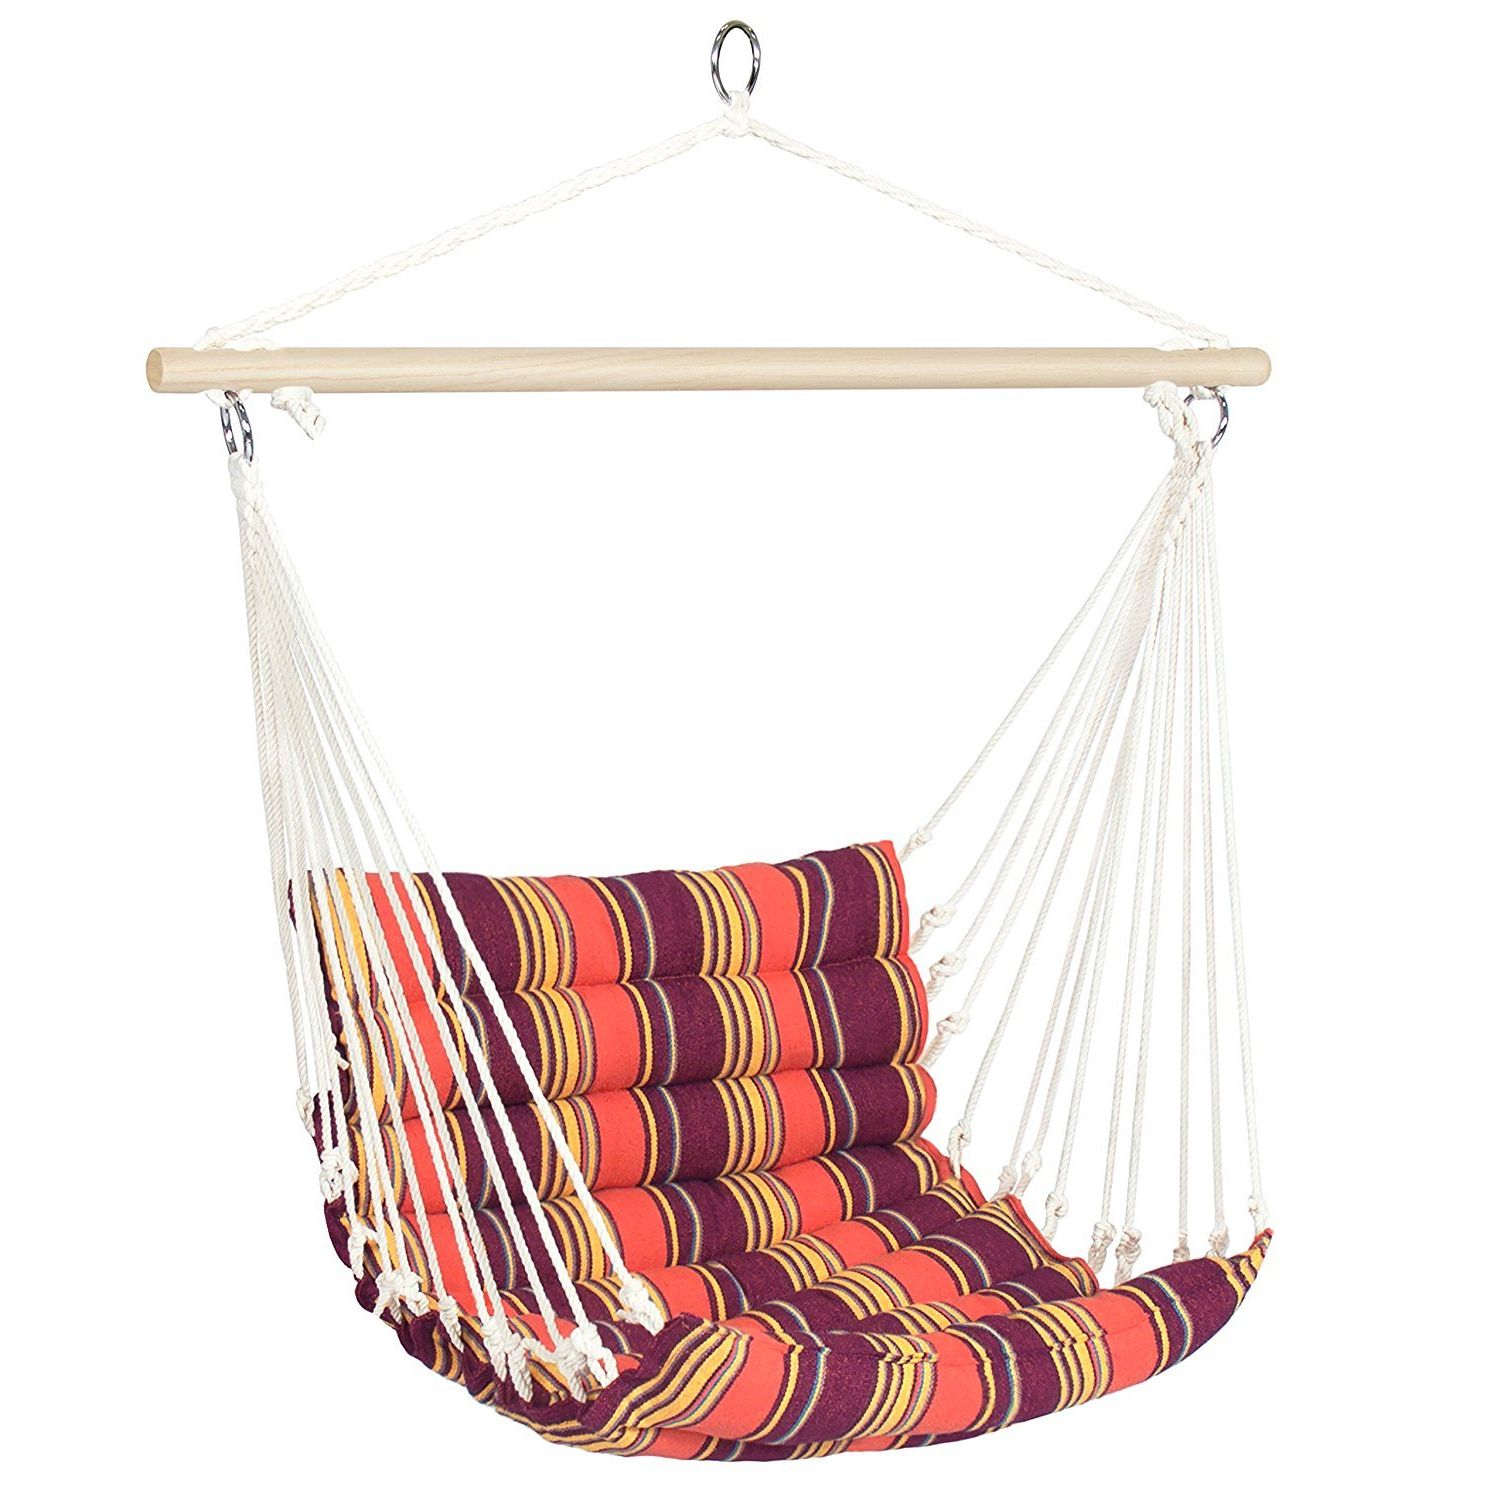 Latest Cotton Porch Swings Intended For Amazon : Bcp Porch Swing Hammock Patio Swings Outdoor (View 2 of 30)